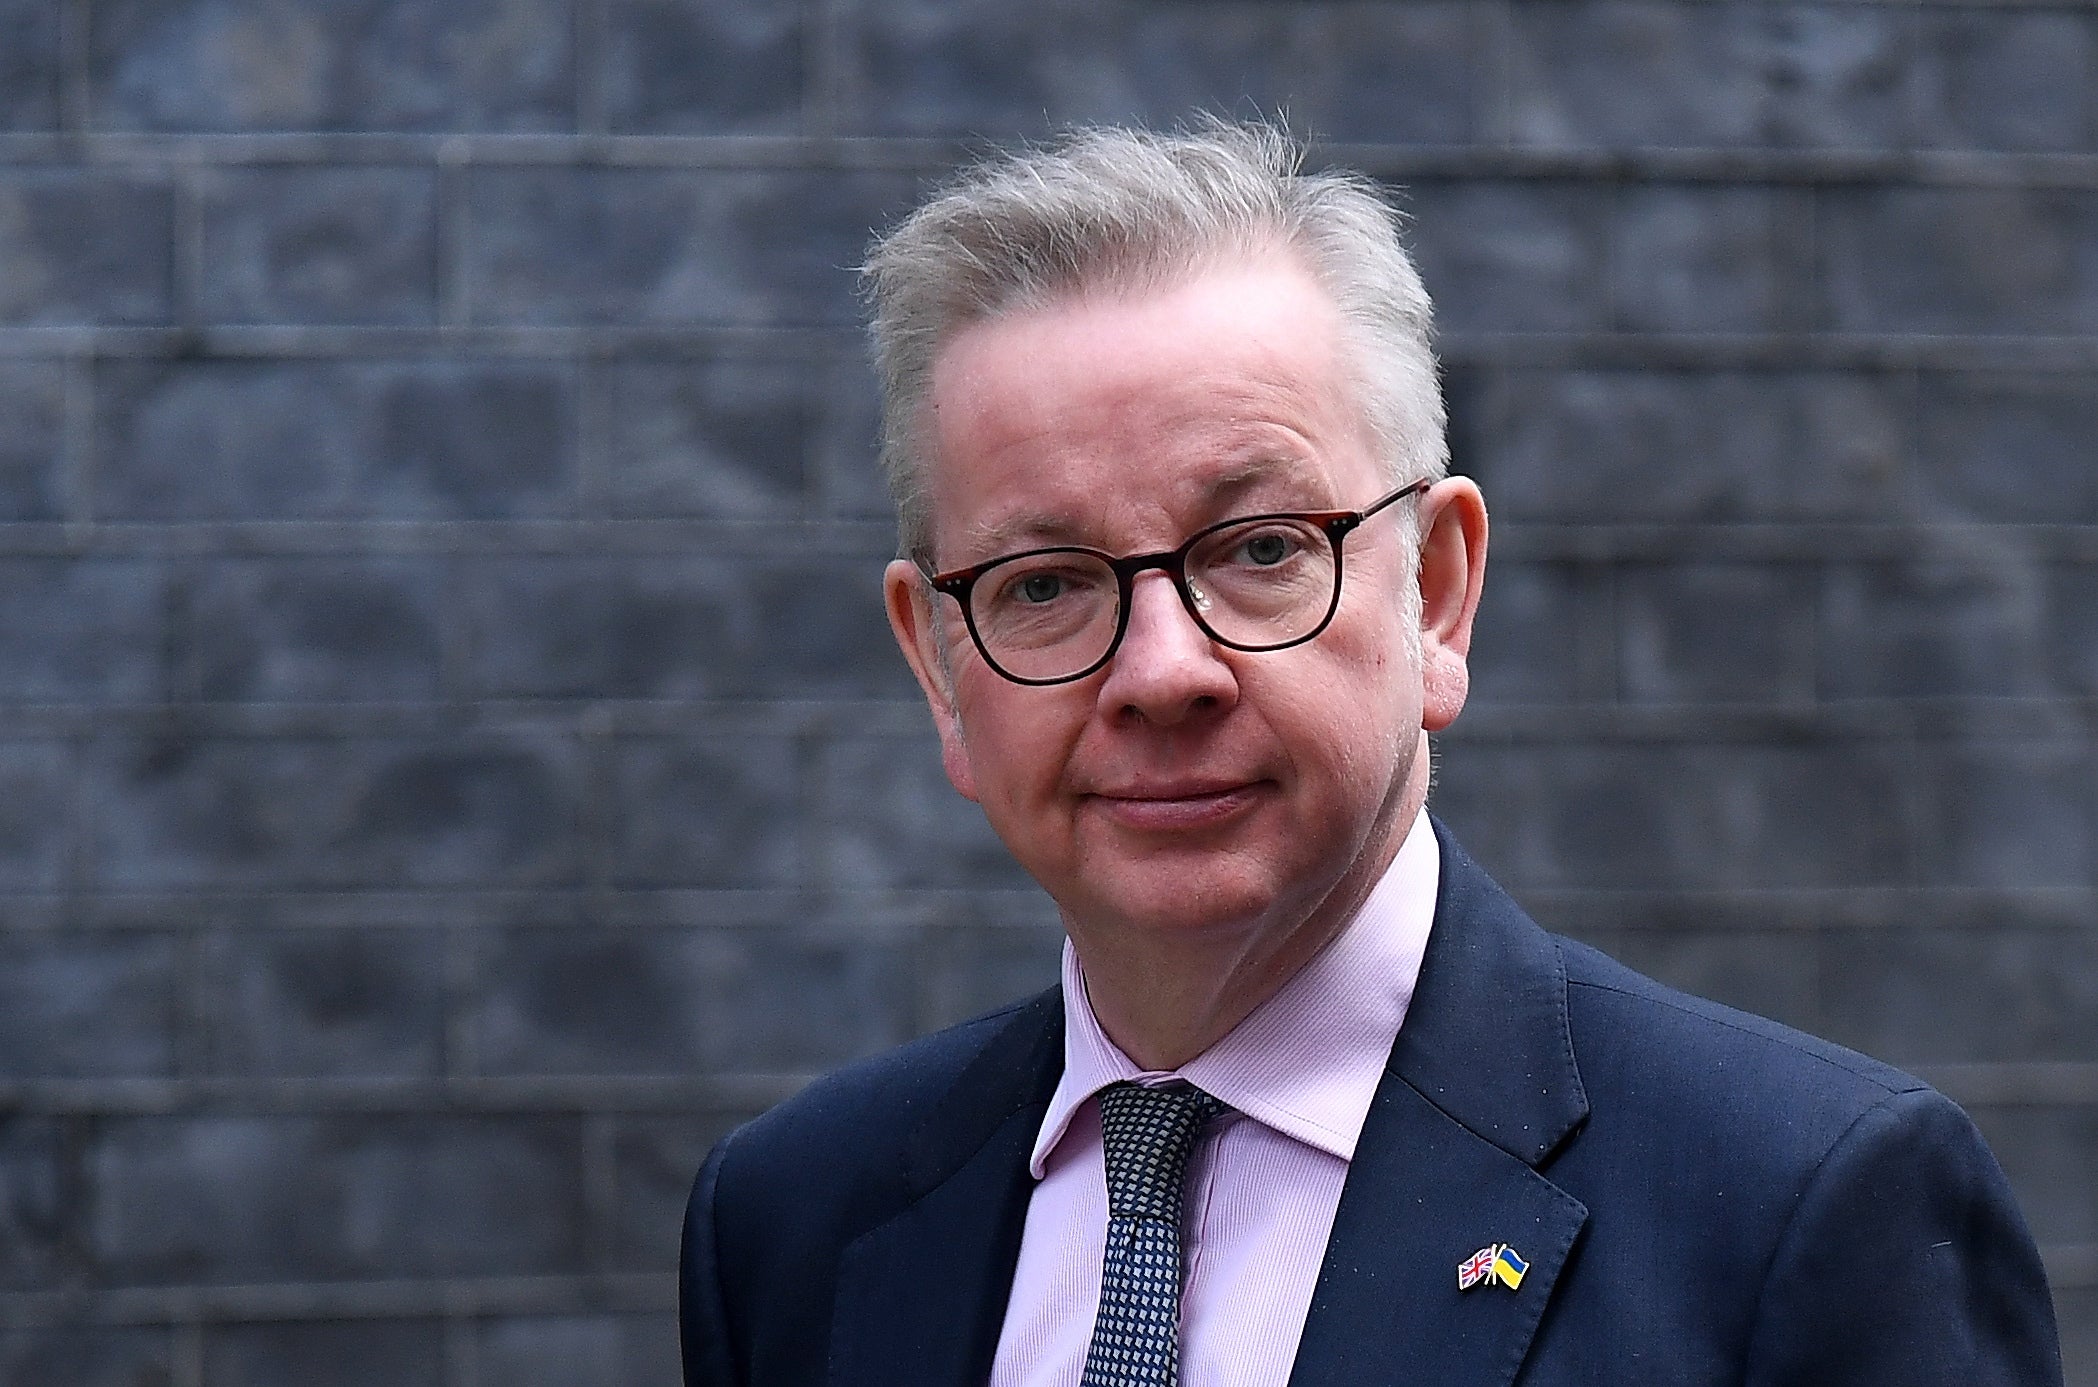 Michael Gove was a previous potential target